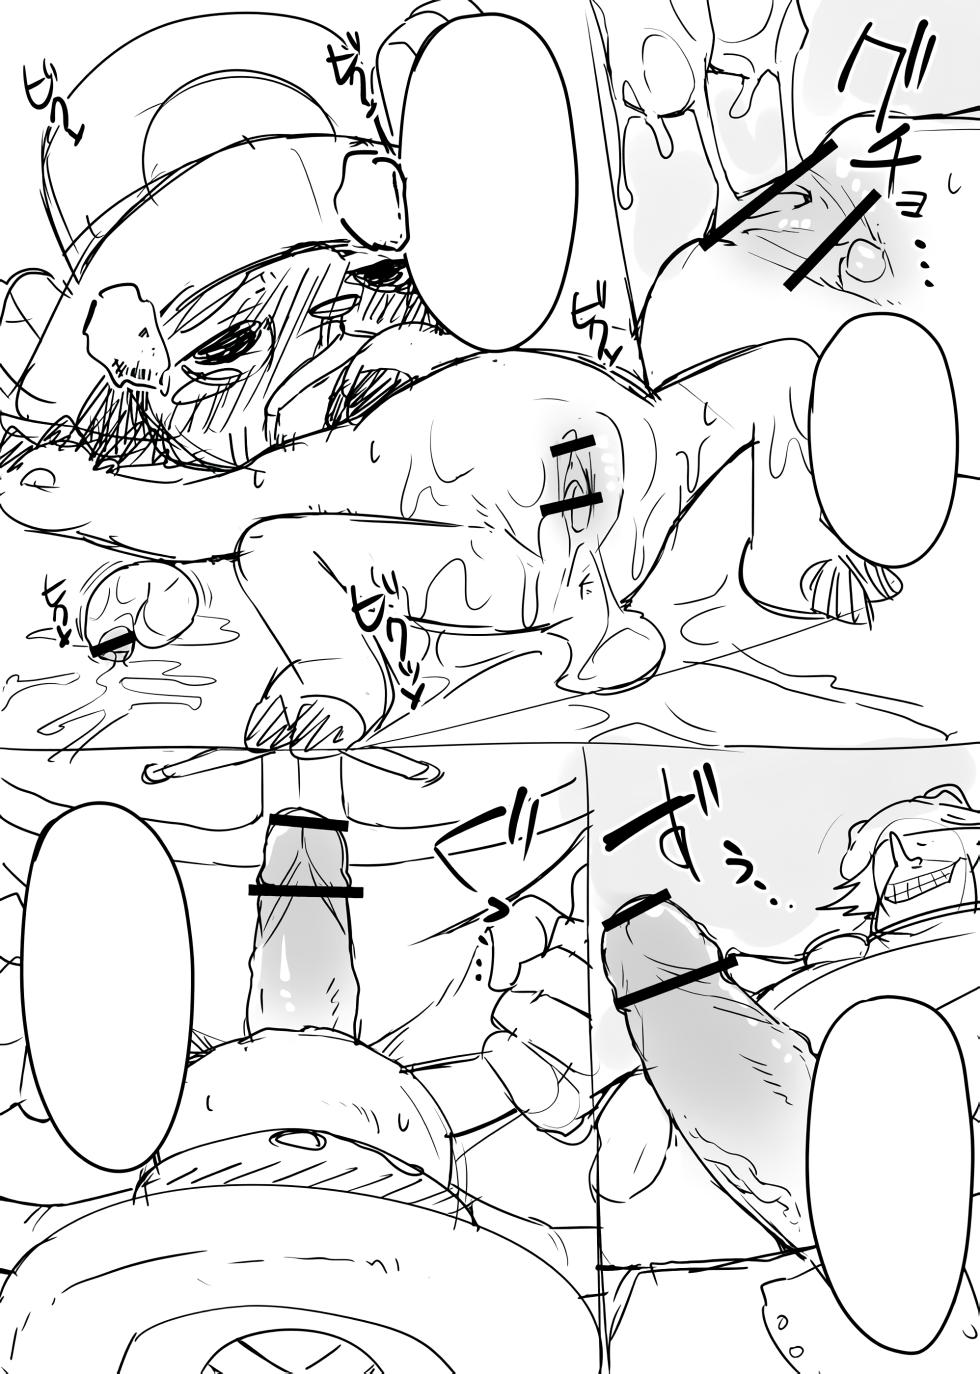 Manmosu Marimo - Chopper Rape and Impregnation + Extra (Text Cleaned) - Page 6